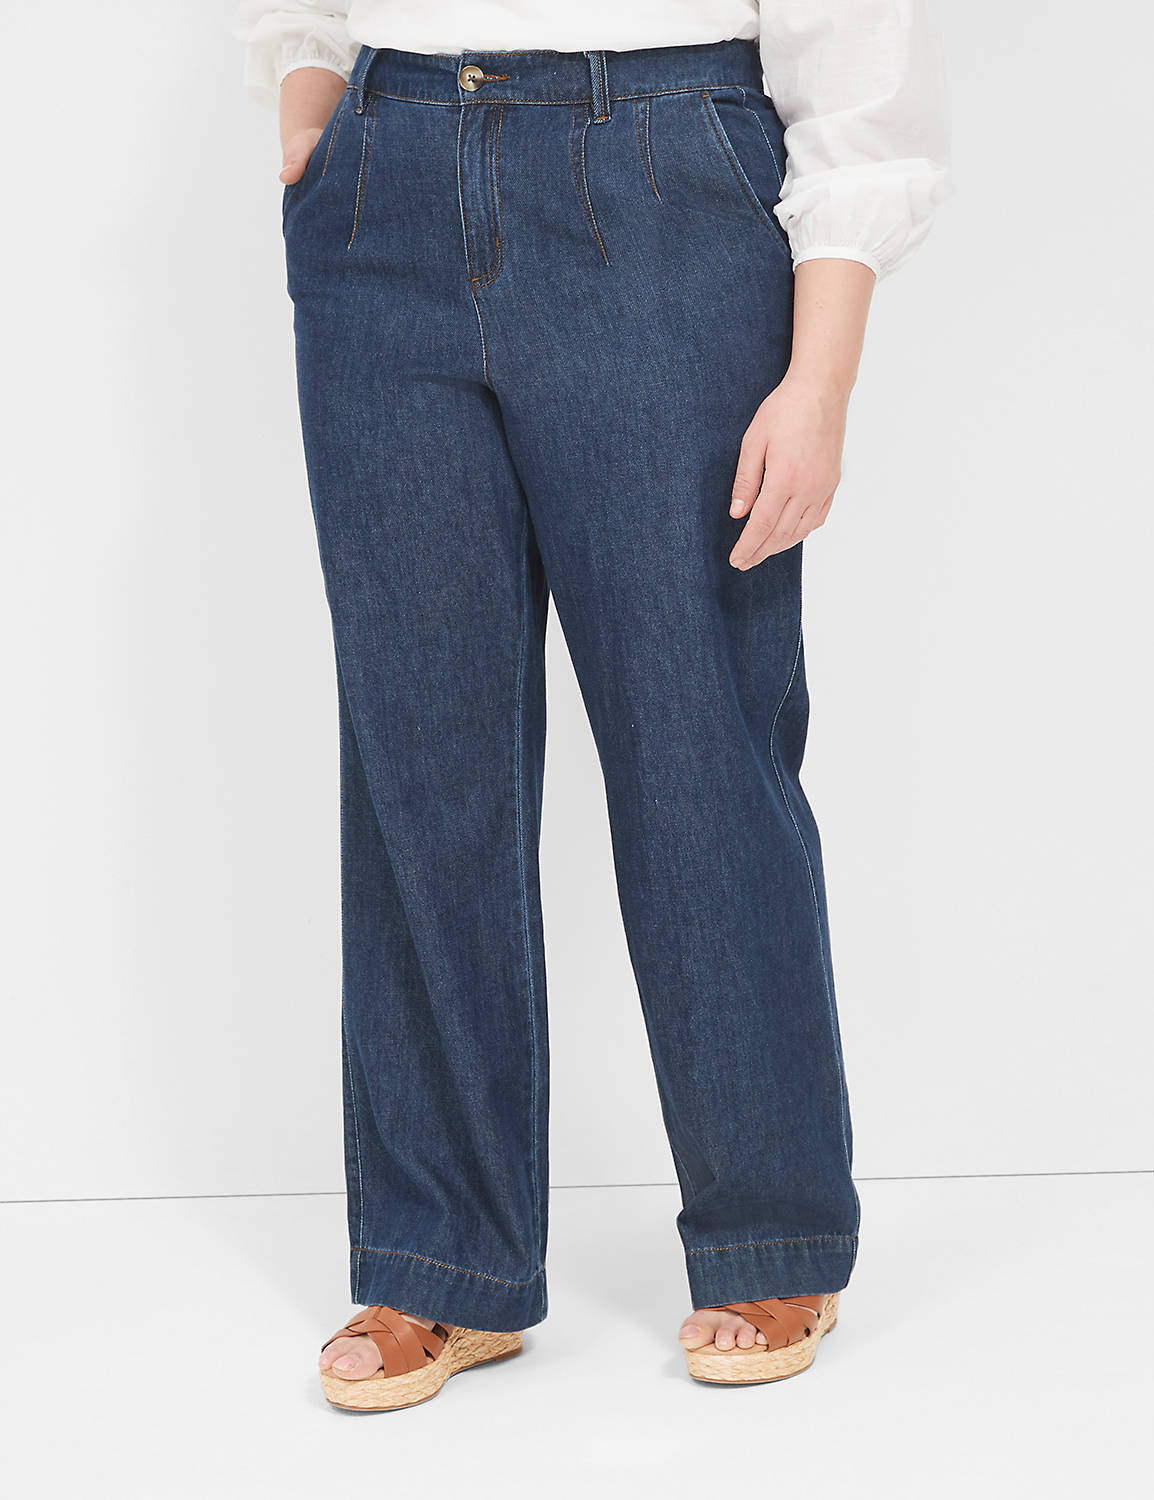 MID RISE WIDE DRESSY TROUSER - RINS Product Image 1